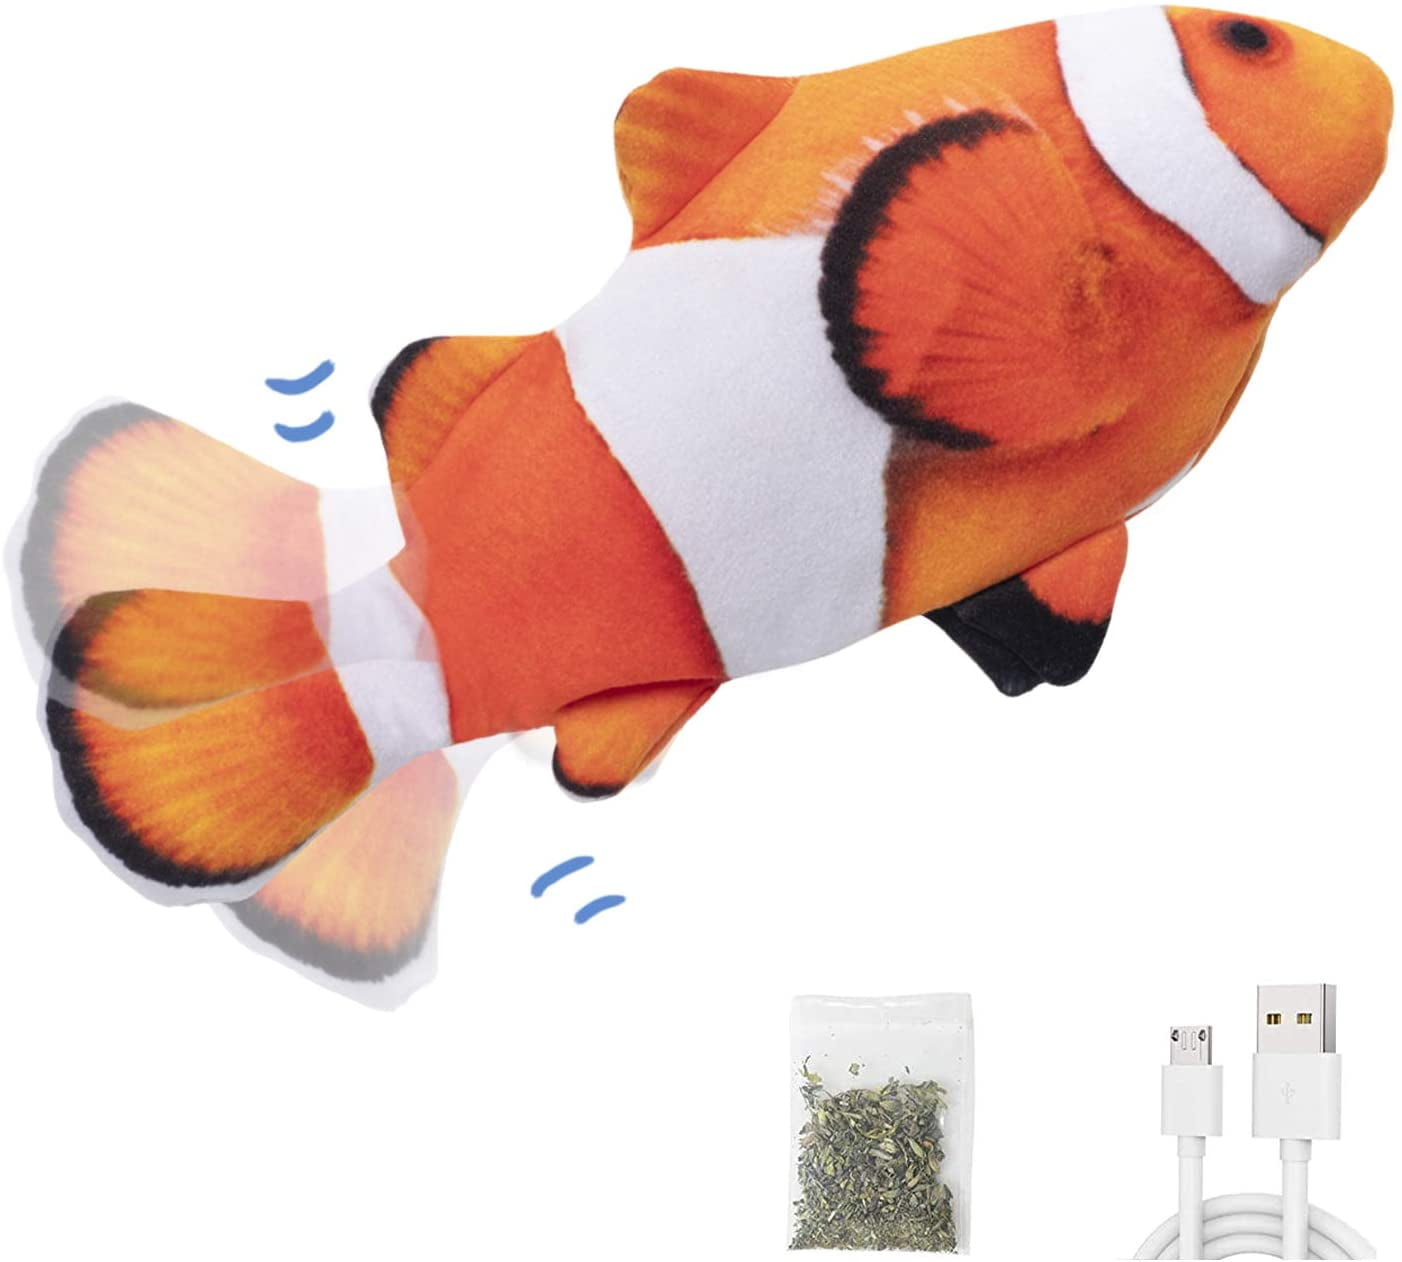  HOMSFOU Simulation Electric Fish Wiggle Fish Catnip Toys  Flopping Fish Toy Chew Toy for Kids Pet Plush Chew Toys Cat Toy Puppy Dog  Toys Plush Fish Toy Cotton Animal Jumping Fish